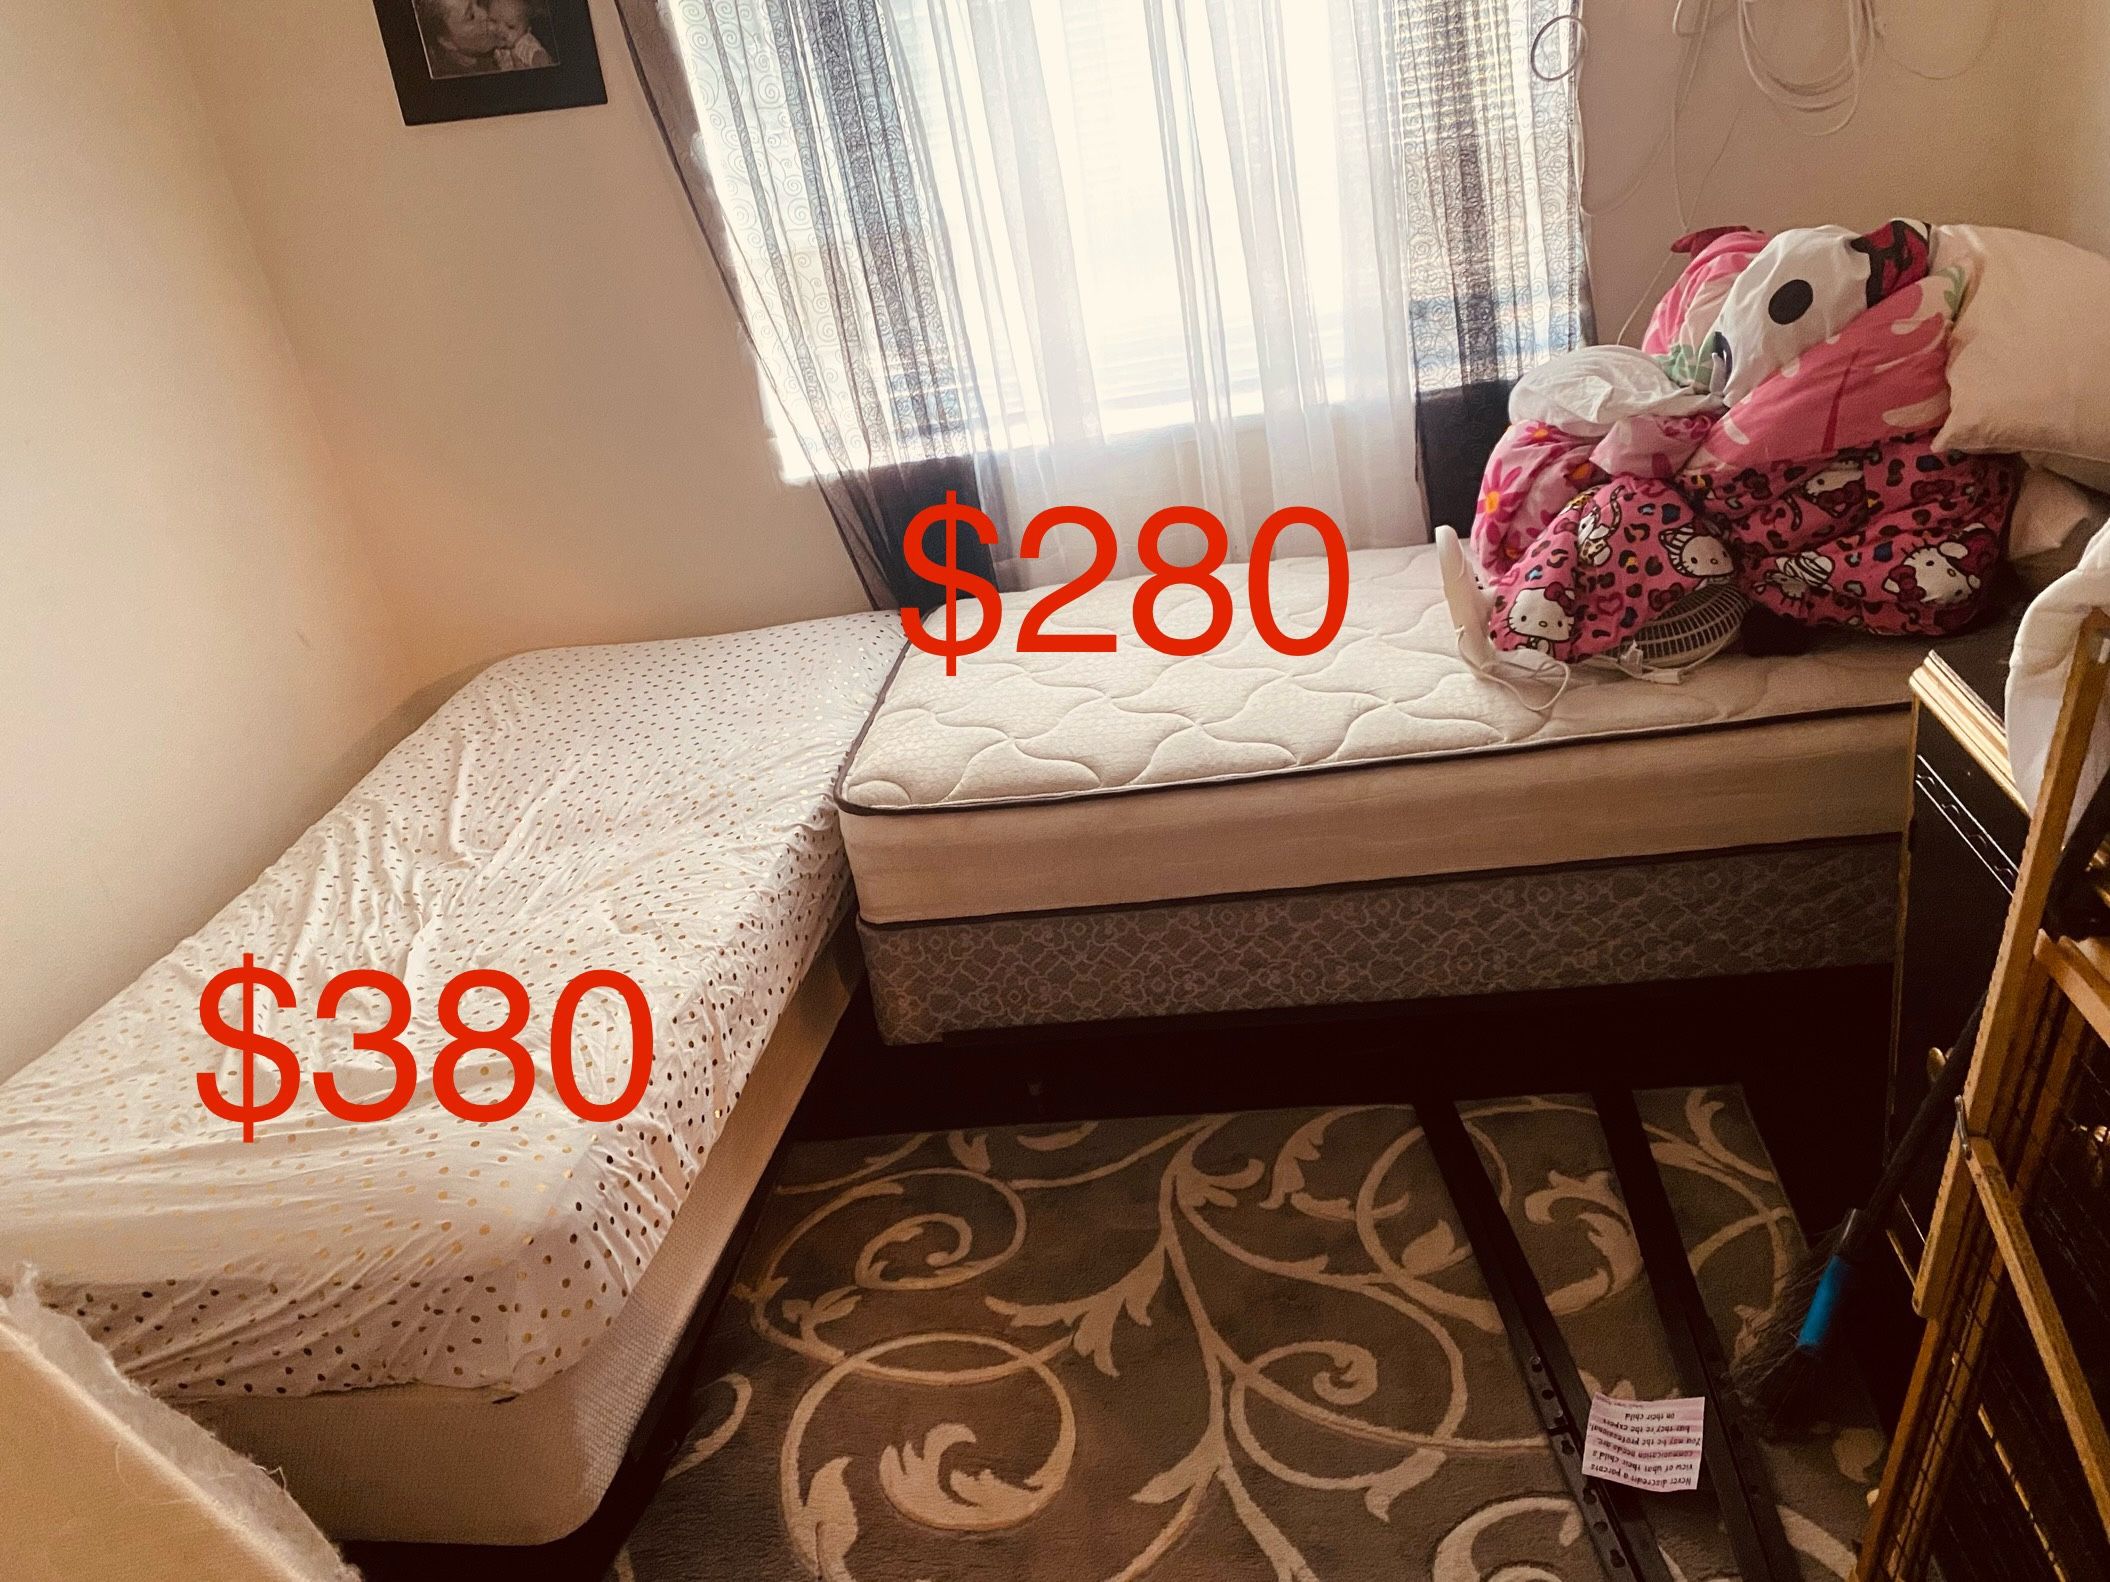 🌠🌠🌠🌠🌠 For sale—2 twin beds with Hollywood style frame— (USED NOT NEW) Priced separately at $280 and $380.  I have stocked up on these from purcha